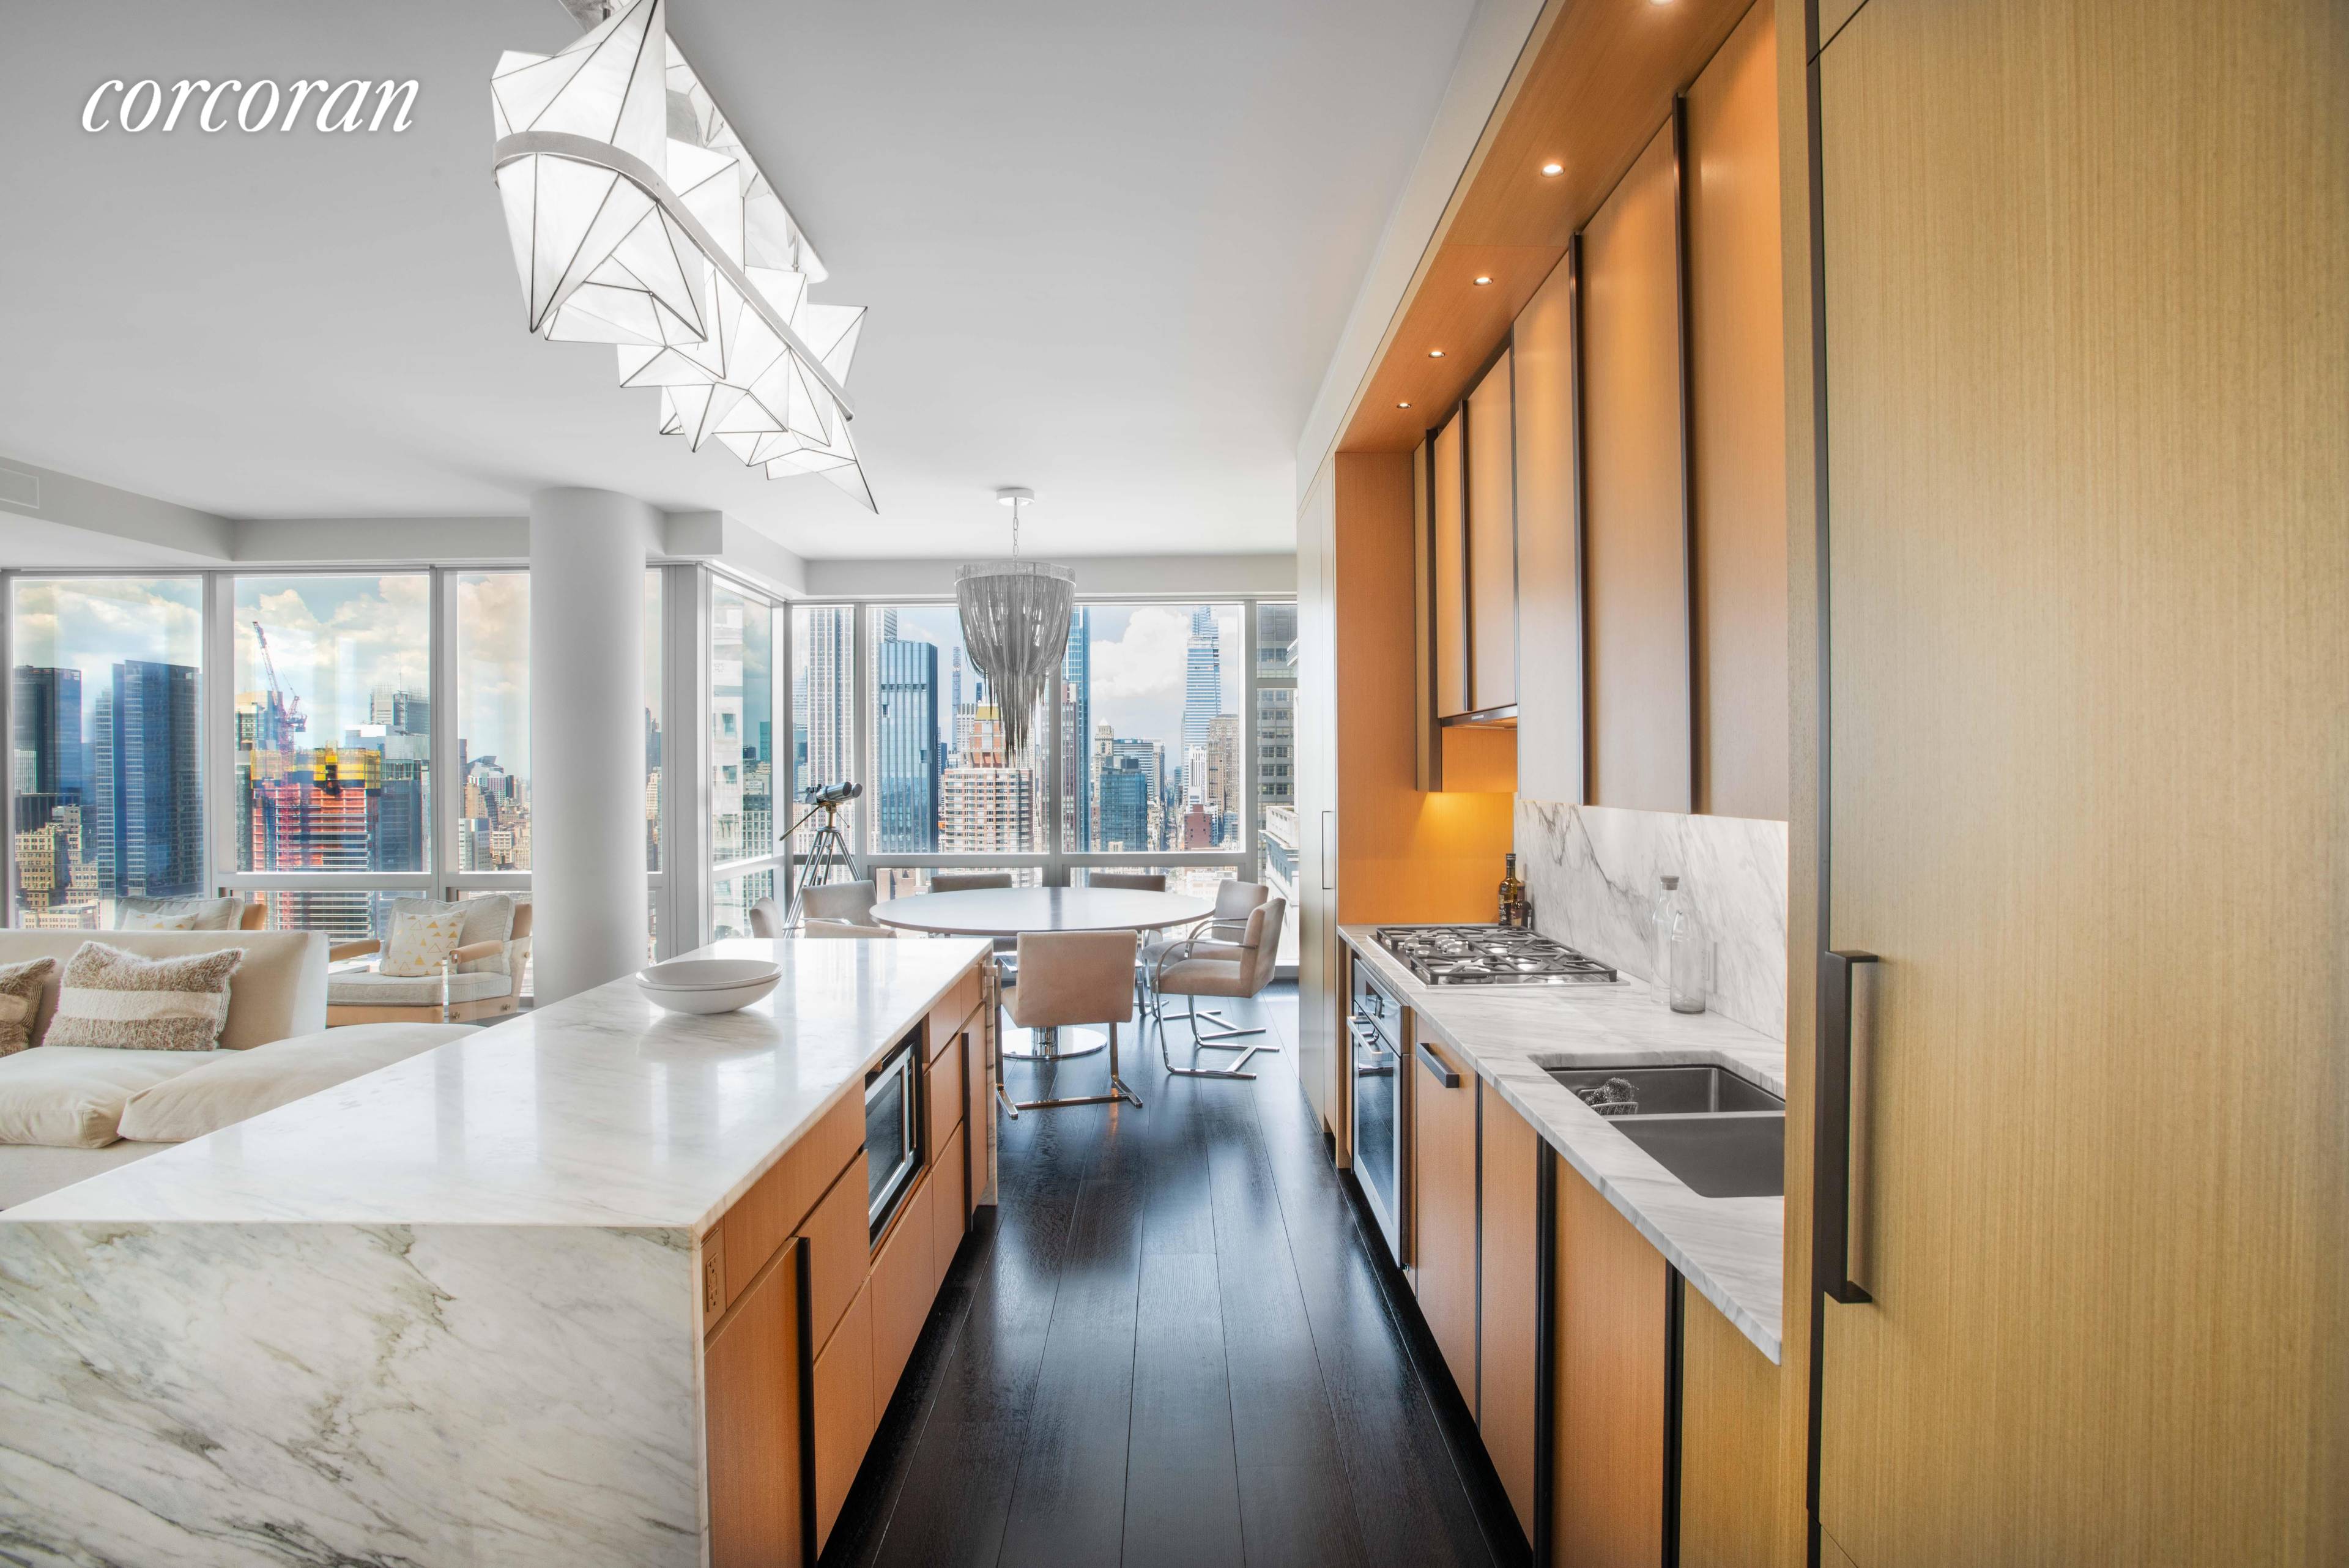 One Madison is an iconic 50 story apartment building that houses some of the best views of New York City.